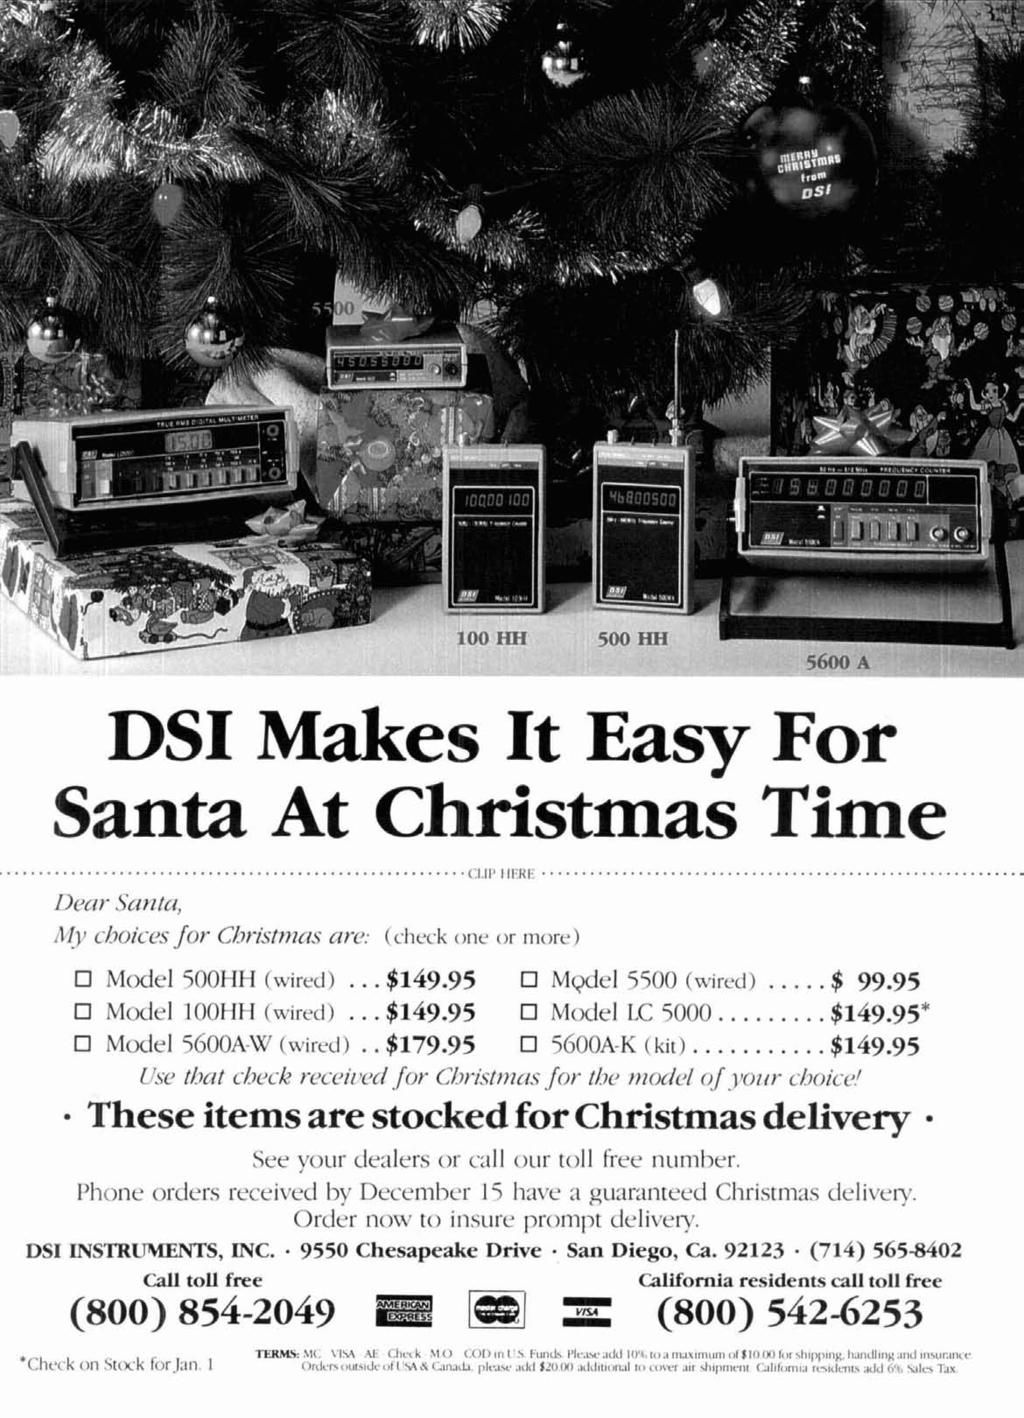 DO ITH DSI Makes It Easy For Santa At Christmas Time... (;1.,1',1,<1<1.'... Decir Santa, 1191 c-hoic--c.s for Christnzc~.s arcj: (check one or more) El Model 5OOHH (wired)... $149.